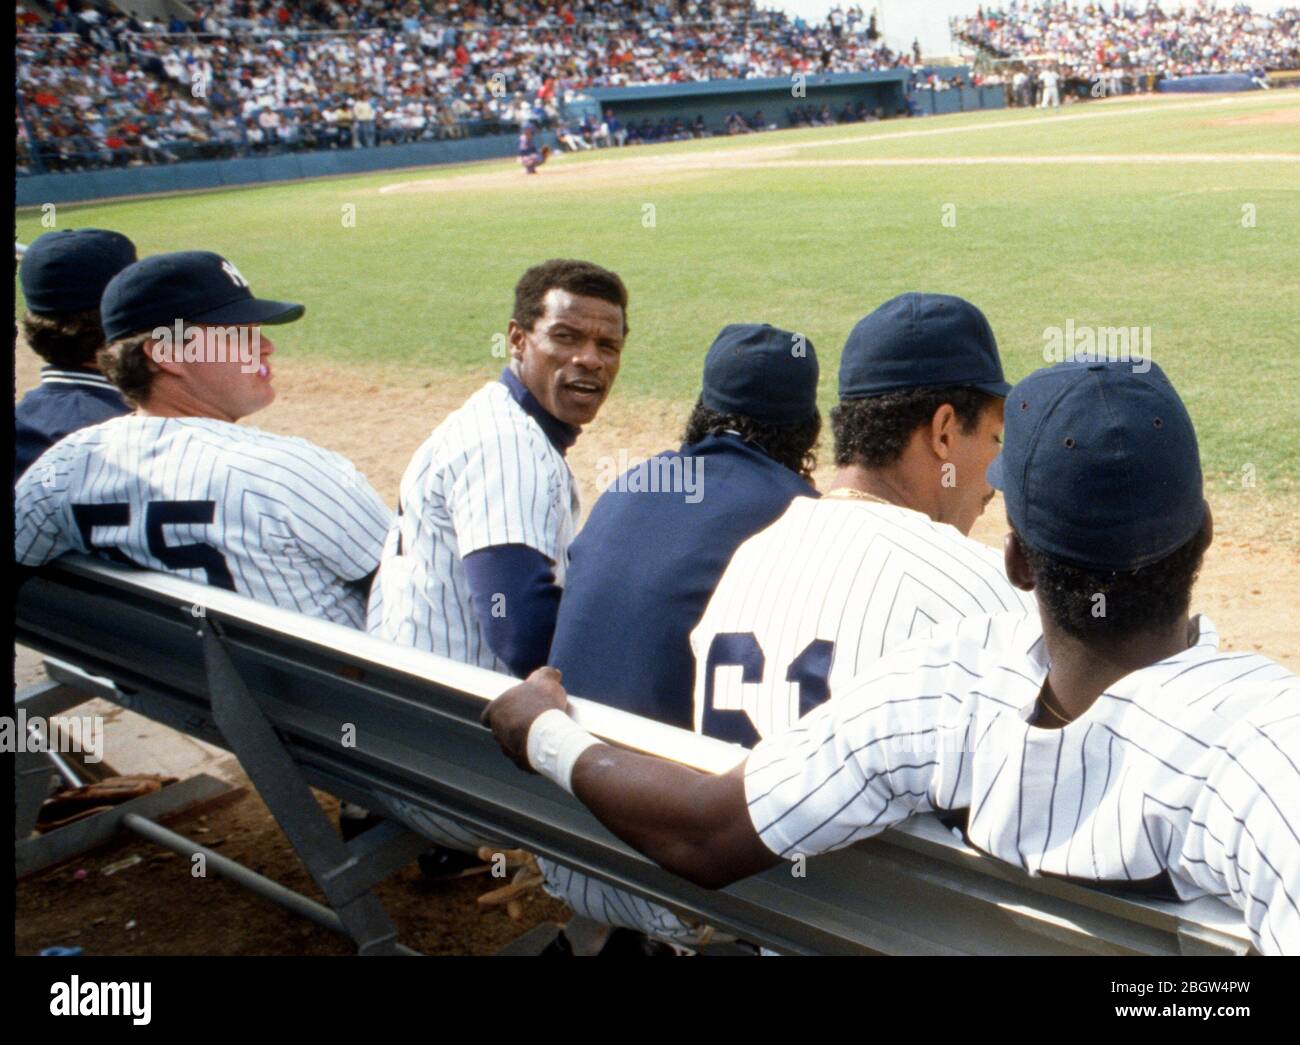 Yankees Rickey Henderson, third from left, with teammates and